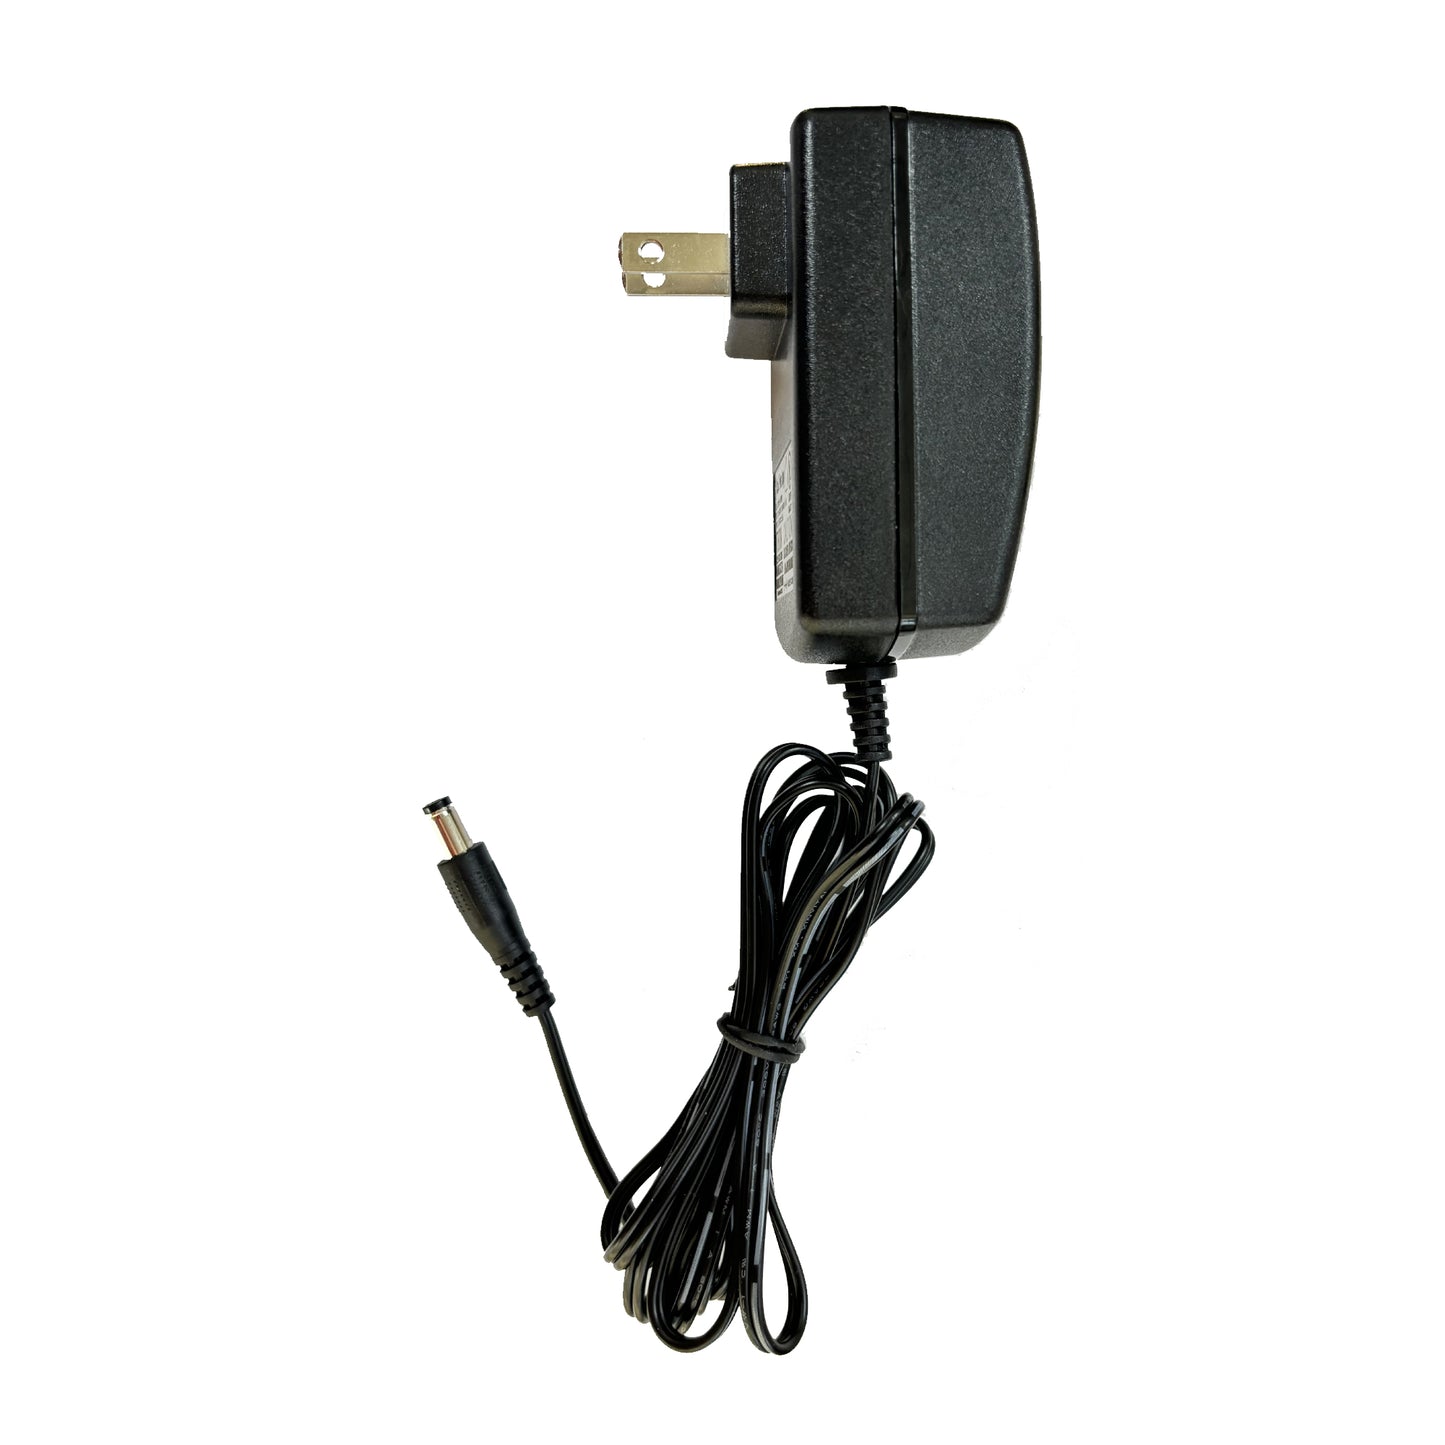 Charger for PATIOX Power Battery